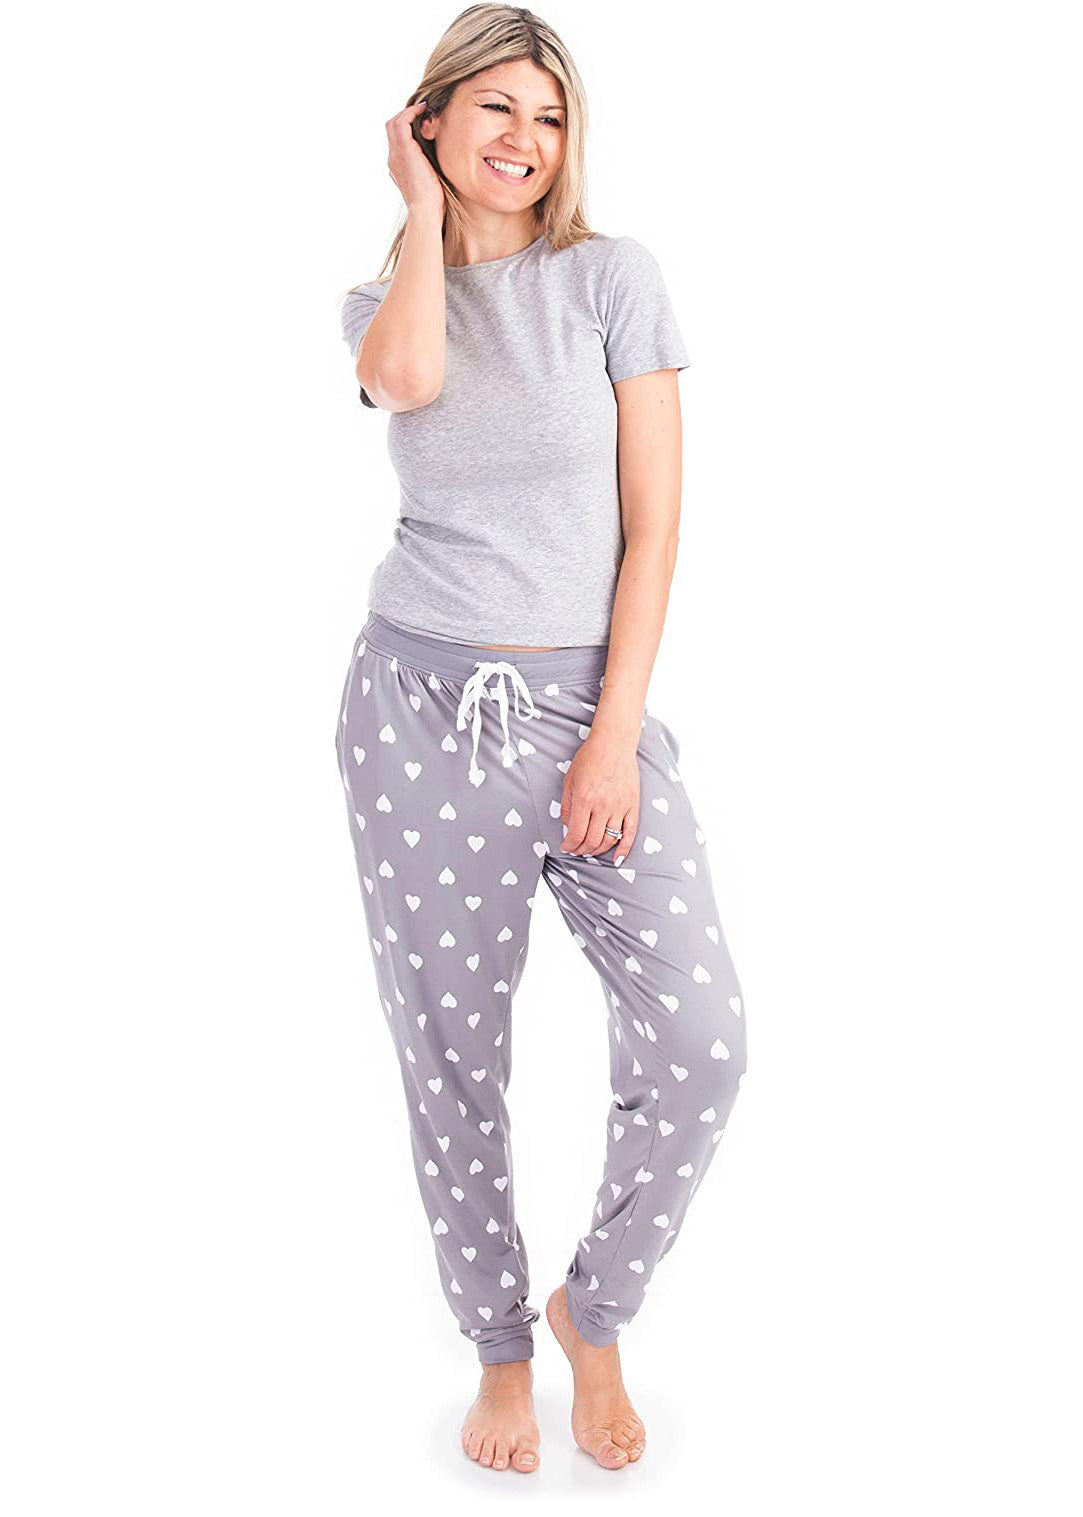 PJ joggers with soft velvety texture, stretch, elastic waistband, drawstring, and stylish ankle cuff. This pattern is white hearts on a grey background. The cuffs and the waist are matching grey.